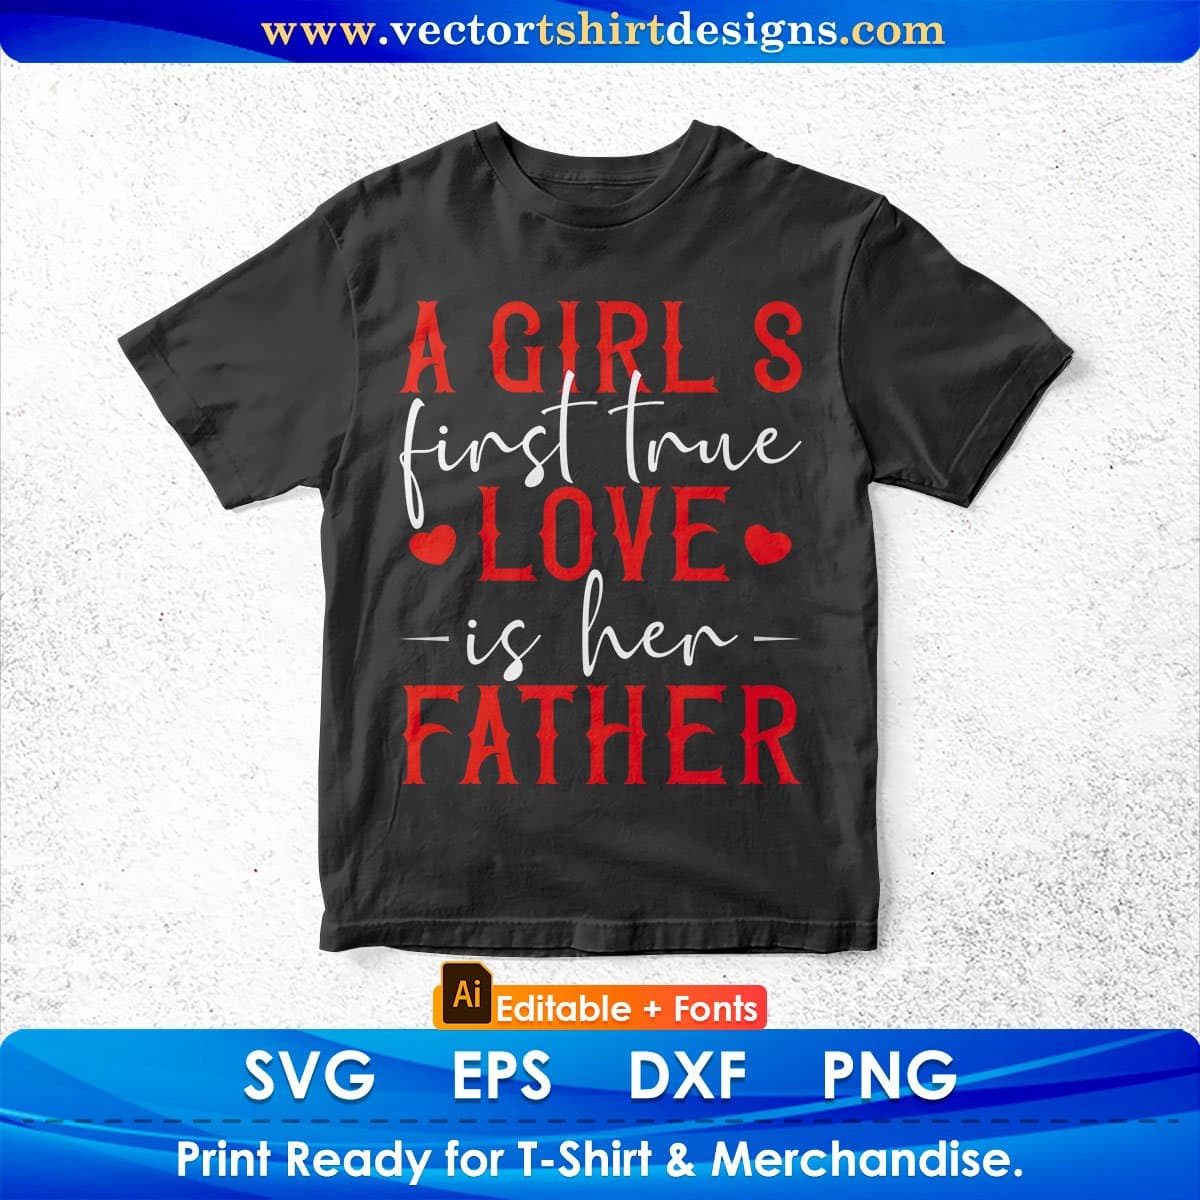 A Girl’s First True Love In Her Father Editable Vector T shirt Design In Svg Png Printable Files